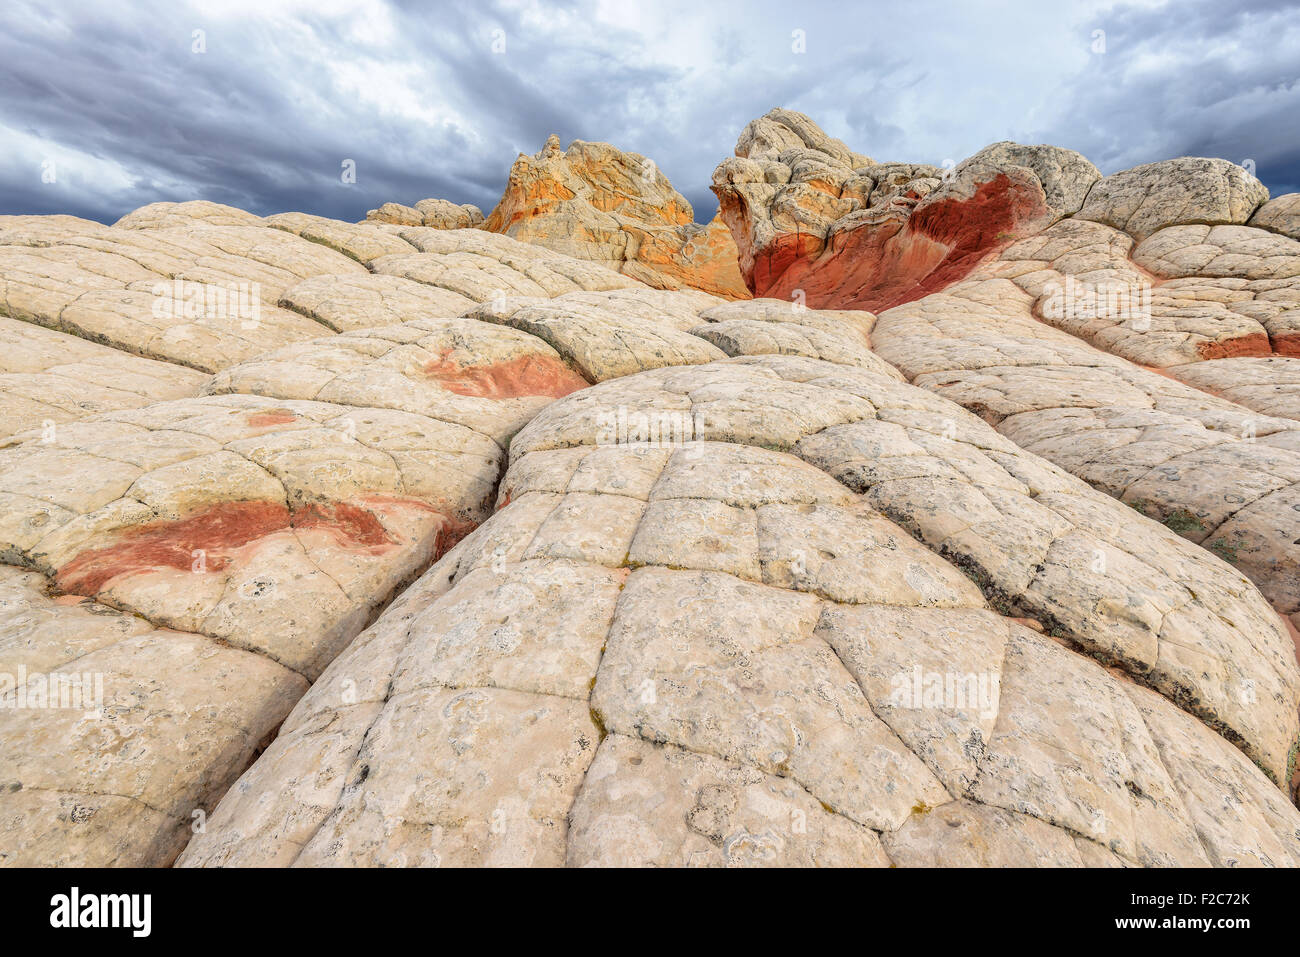 Sandstone rock formation at the White Pocket, Paria Plateau in Northern Arizona, USA Stock Photo